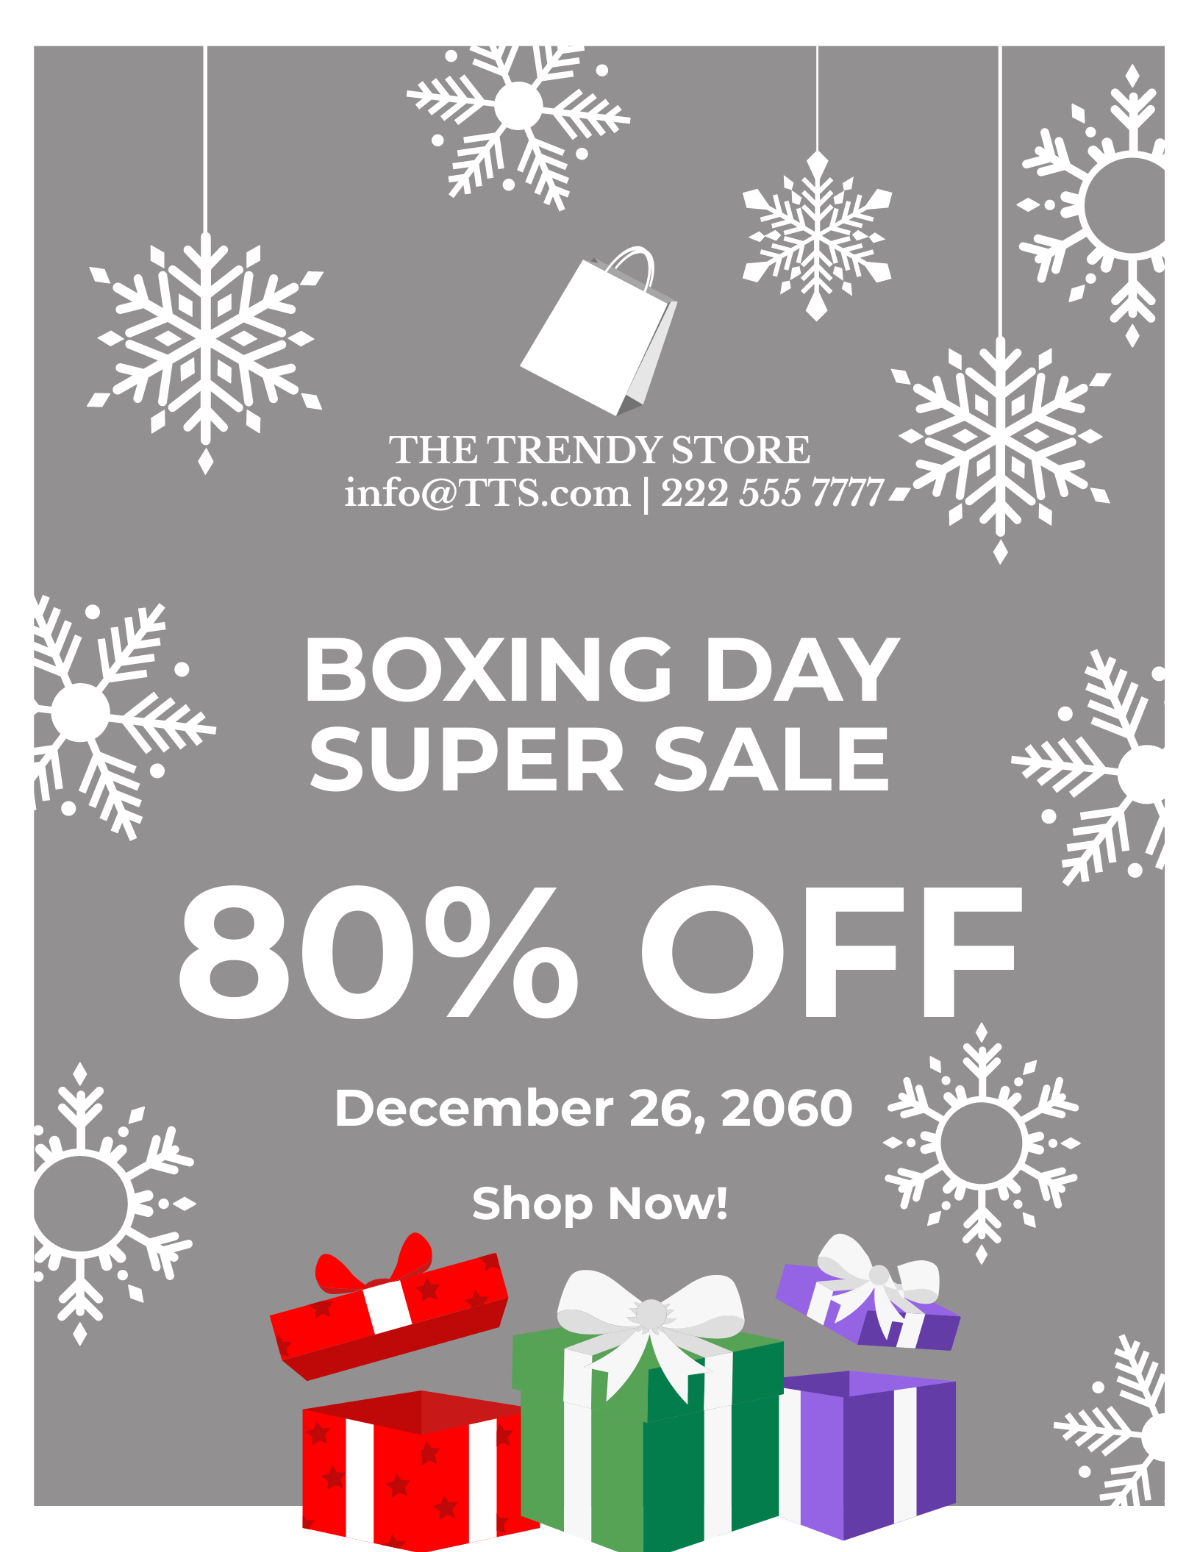 Free Boxing Day Advertising Flyer Template